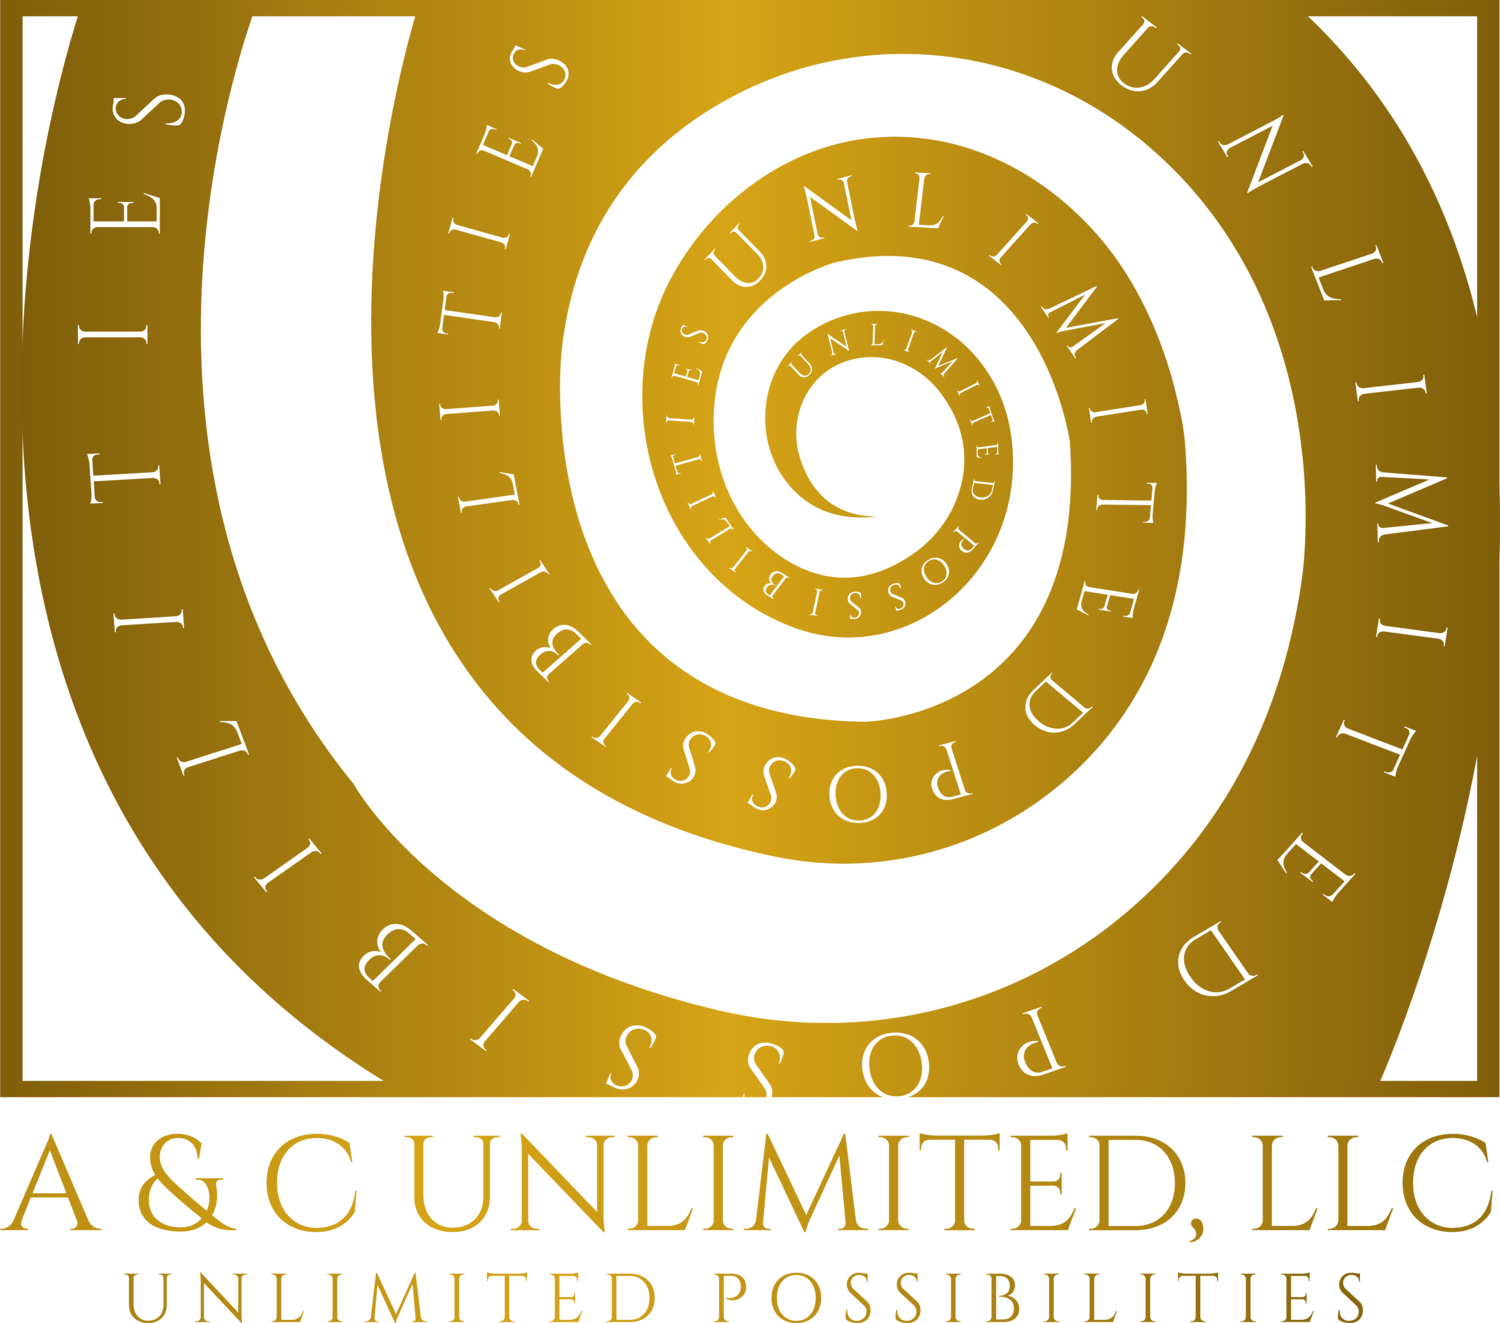 A & C Unlimited